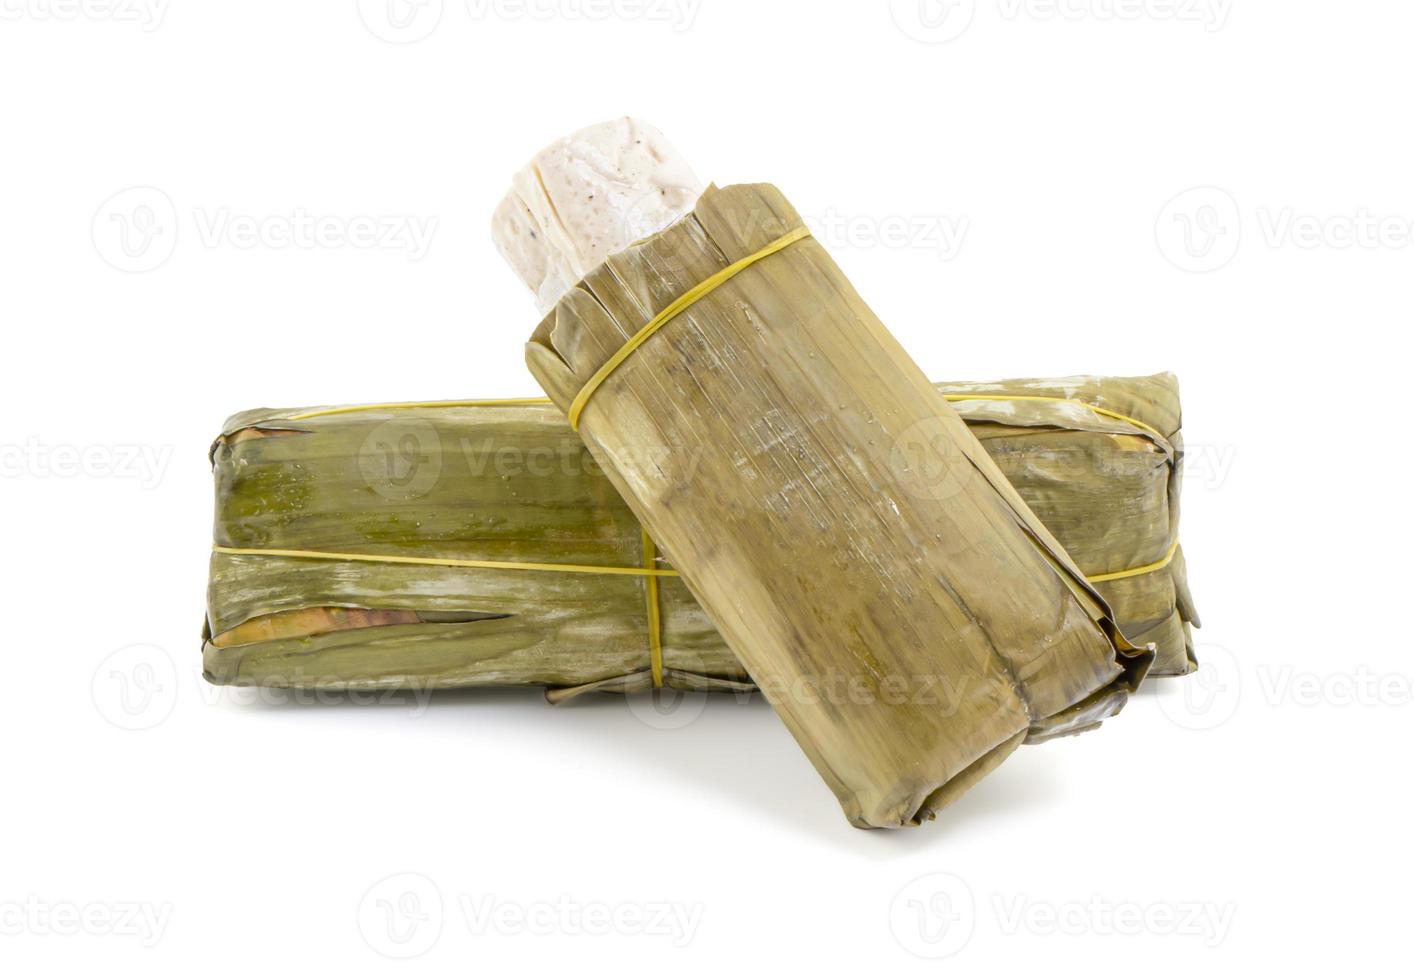 Pork sausage, or moo yor, wrapped in banana leaves on white background photo